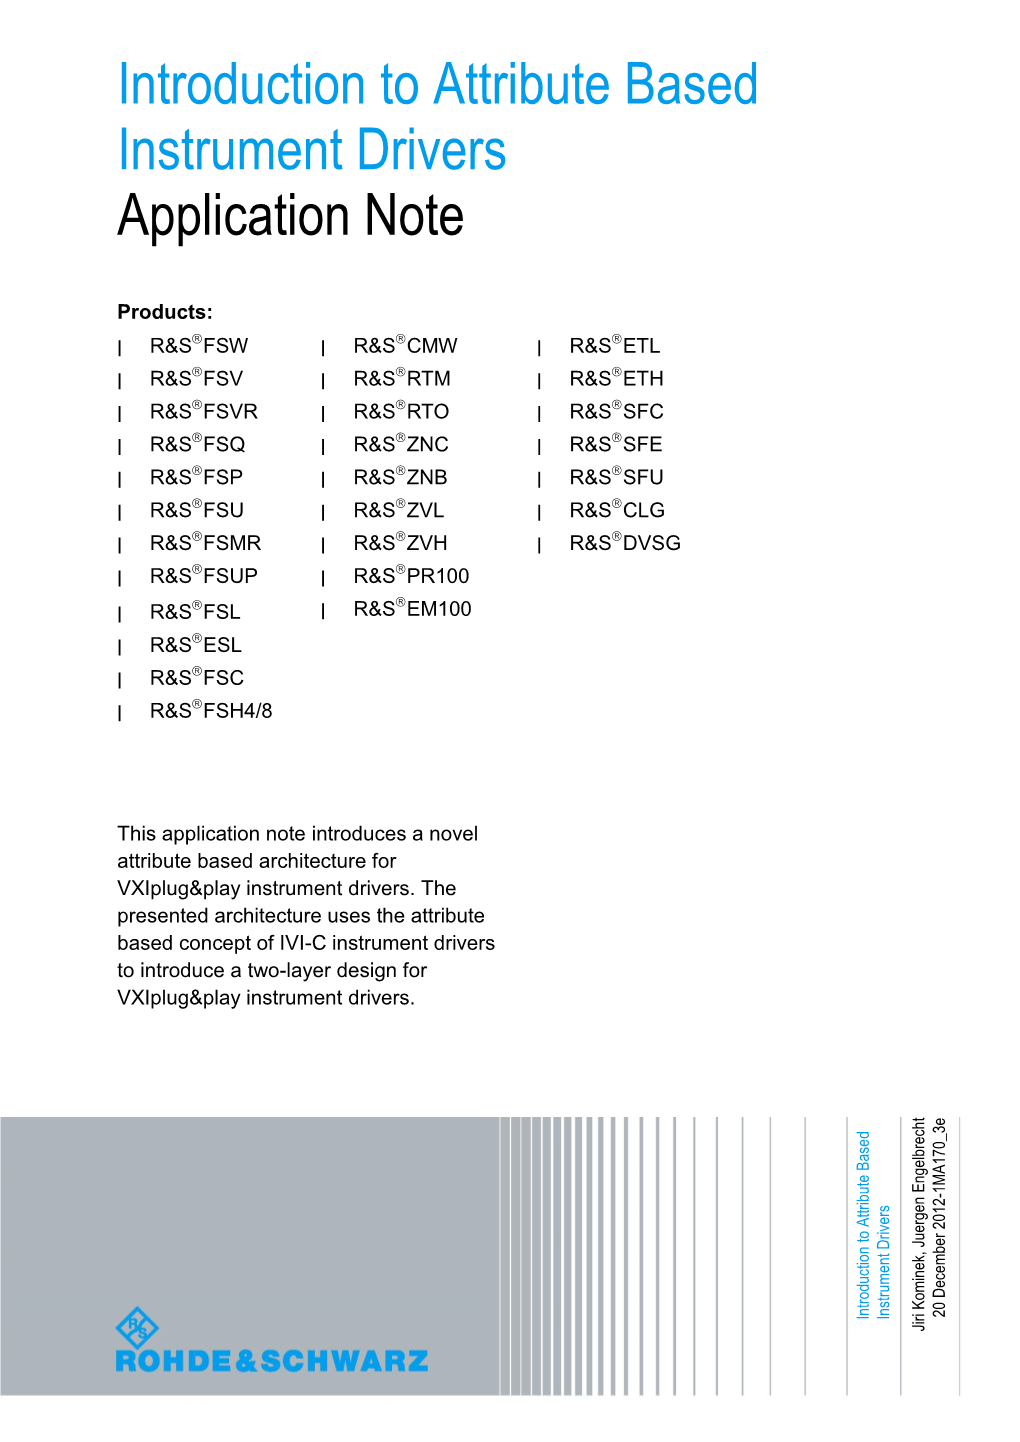 Introduction to Attribute Based Instrument Drivers Application Note